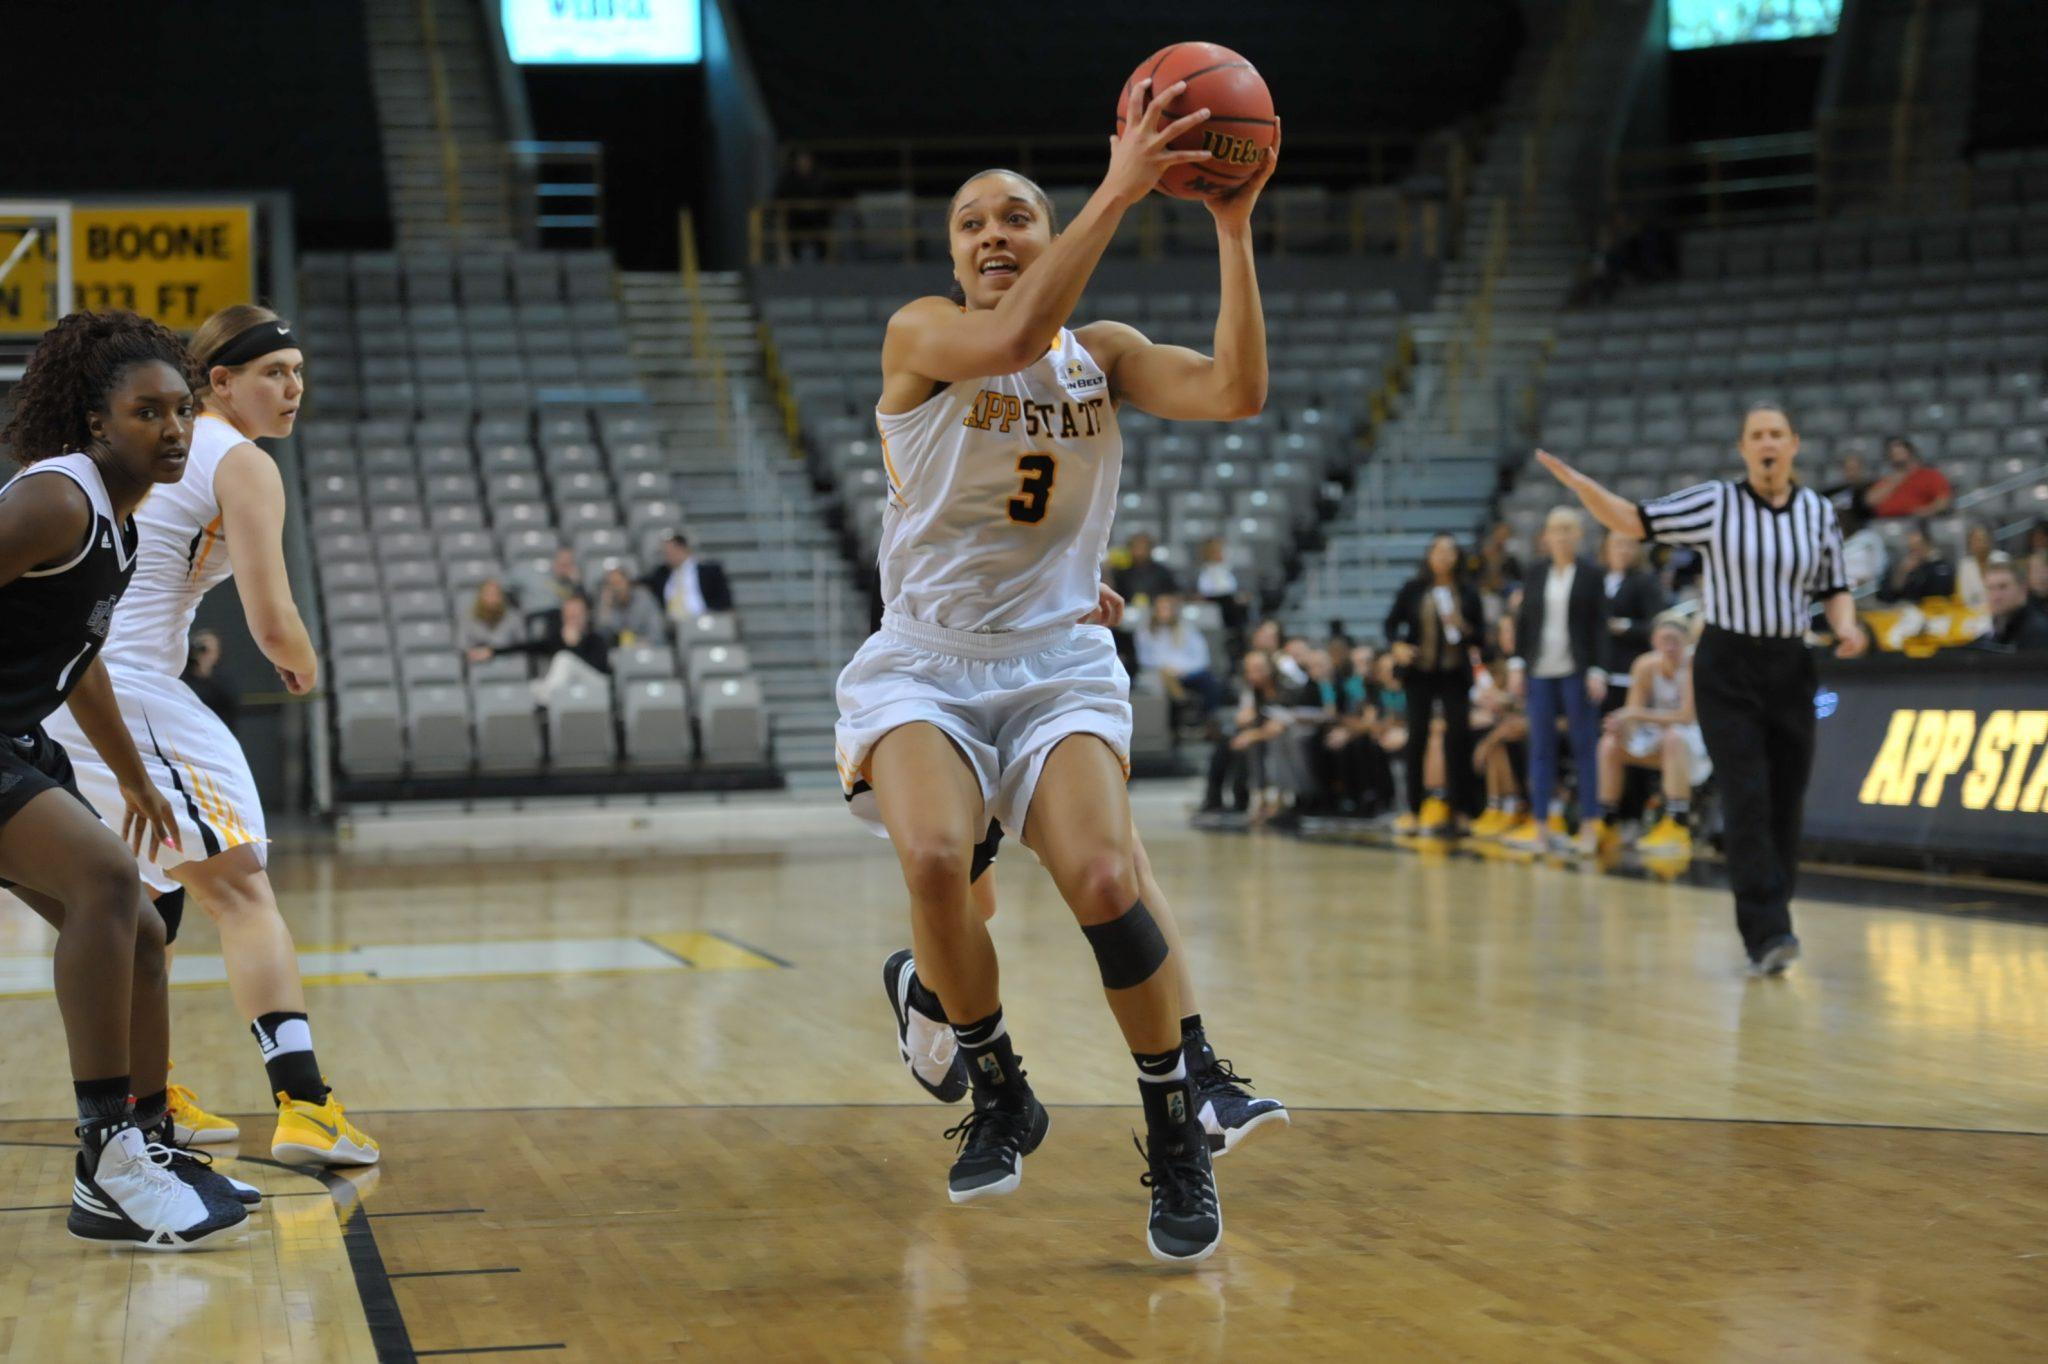 Forward Bria Carter finished with 20 points, a career high.
Photo courtesy: App State Athletics